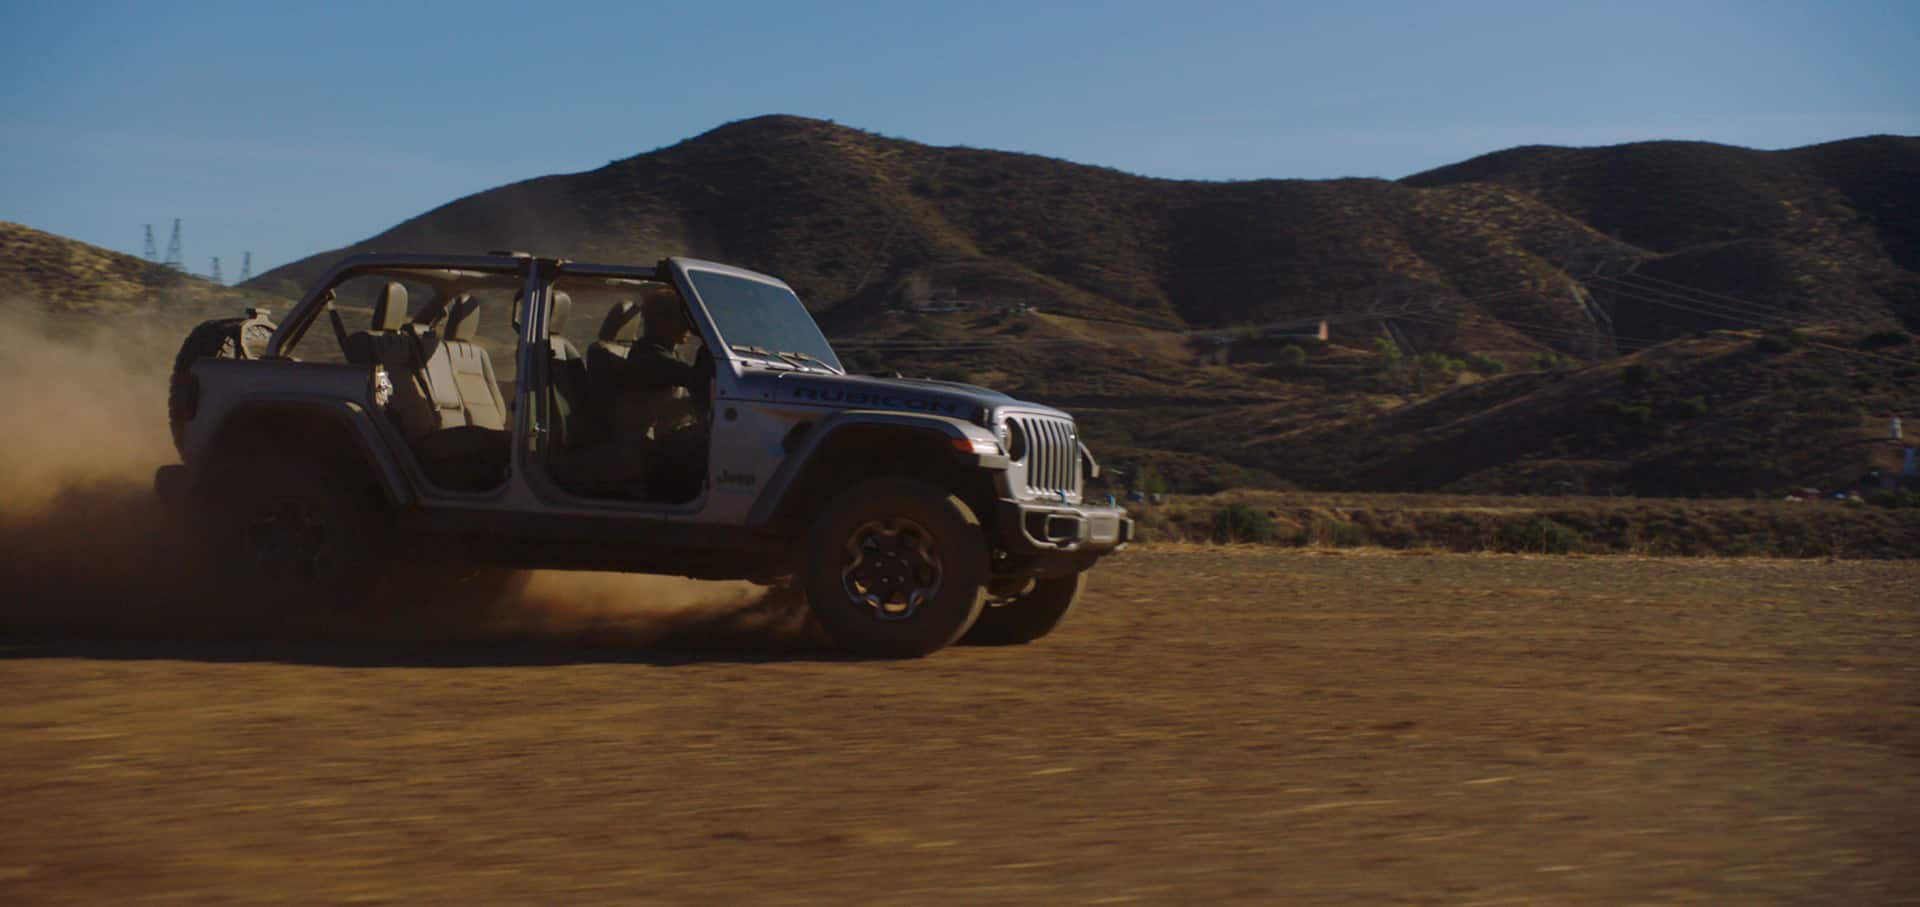 The 2023 Jeep Wrangler Rubicon 4xe being driven on sand with its doors off and a cloud of dust obscuring its rear wheels.